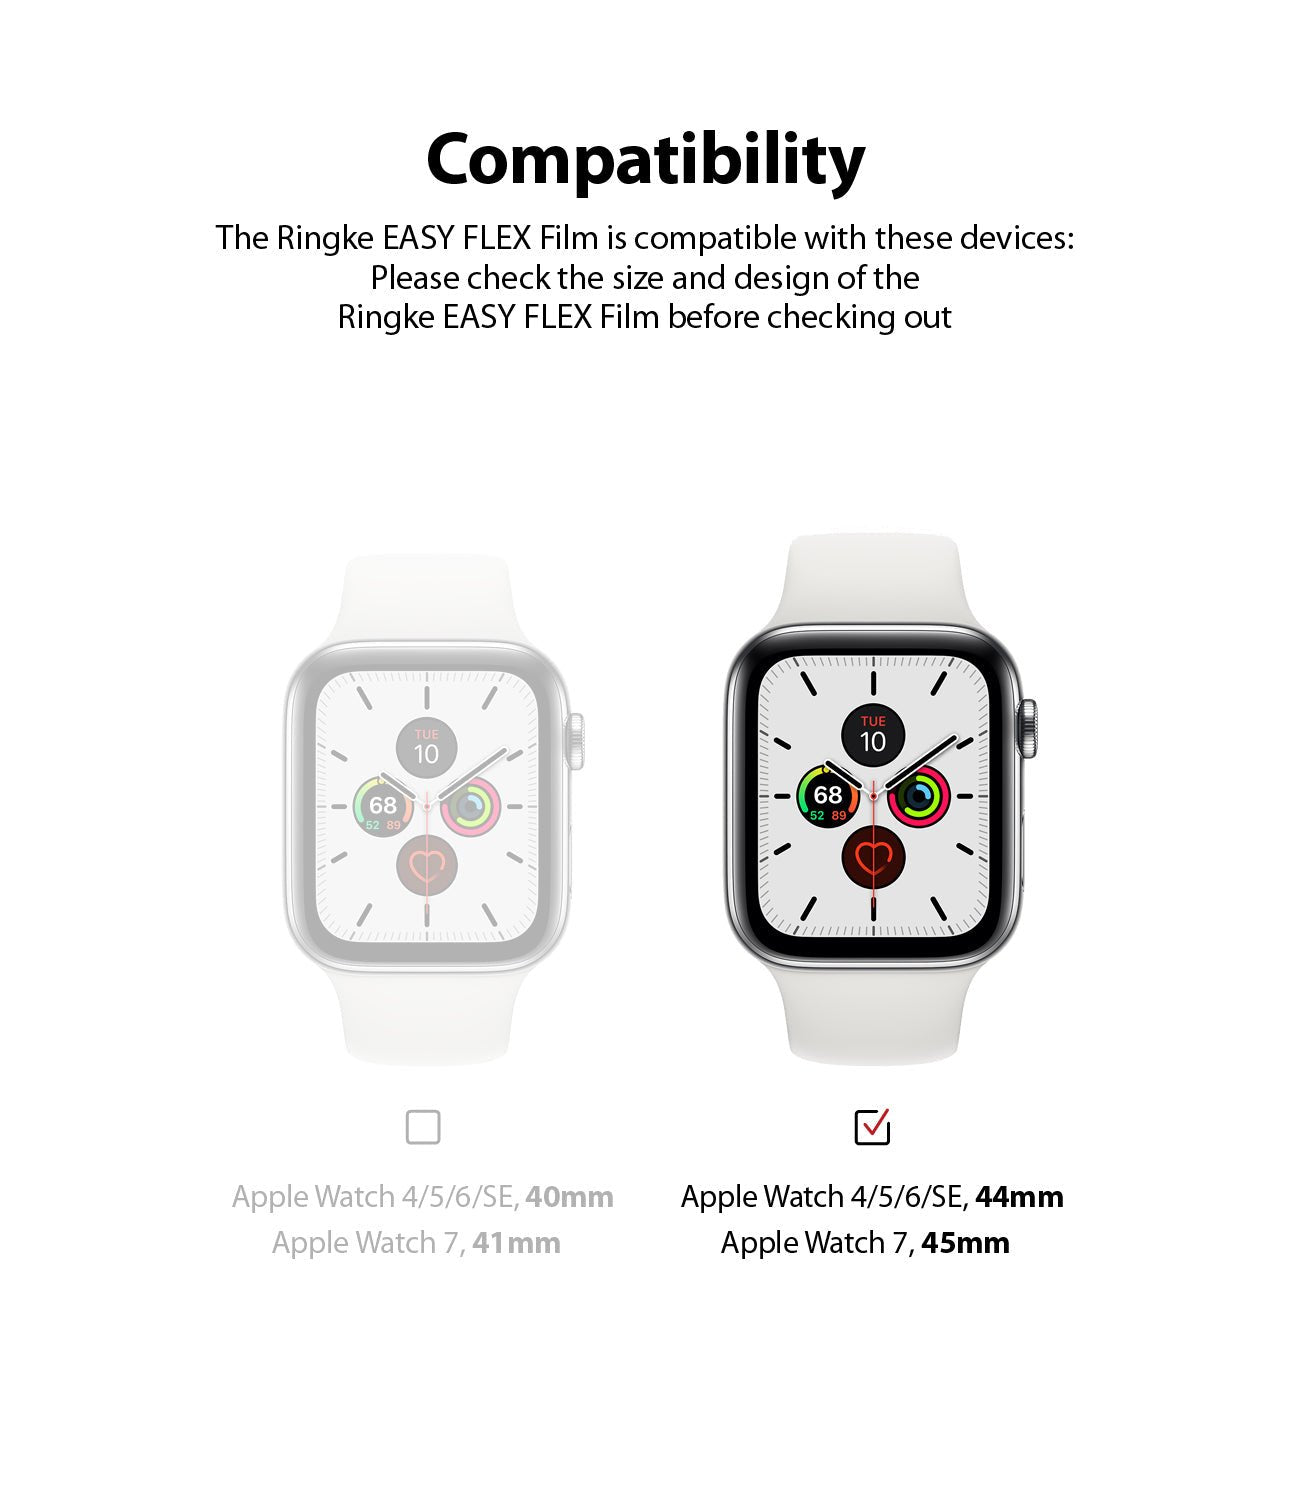 Compatible with Apple Watch Series 4, 5, 6, and SE (44mm), as well as Series 7, 8, and 9 (45mm).